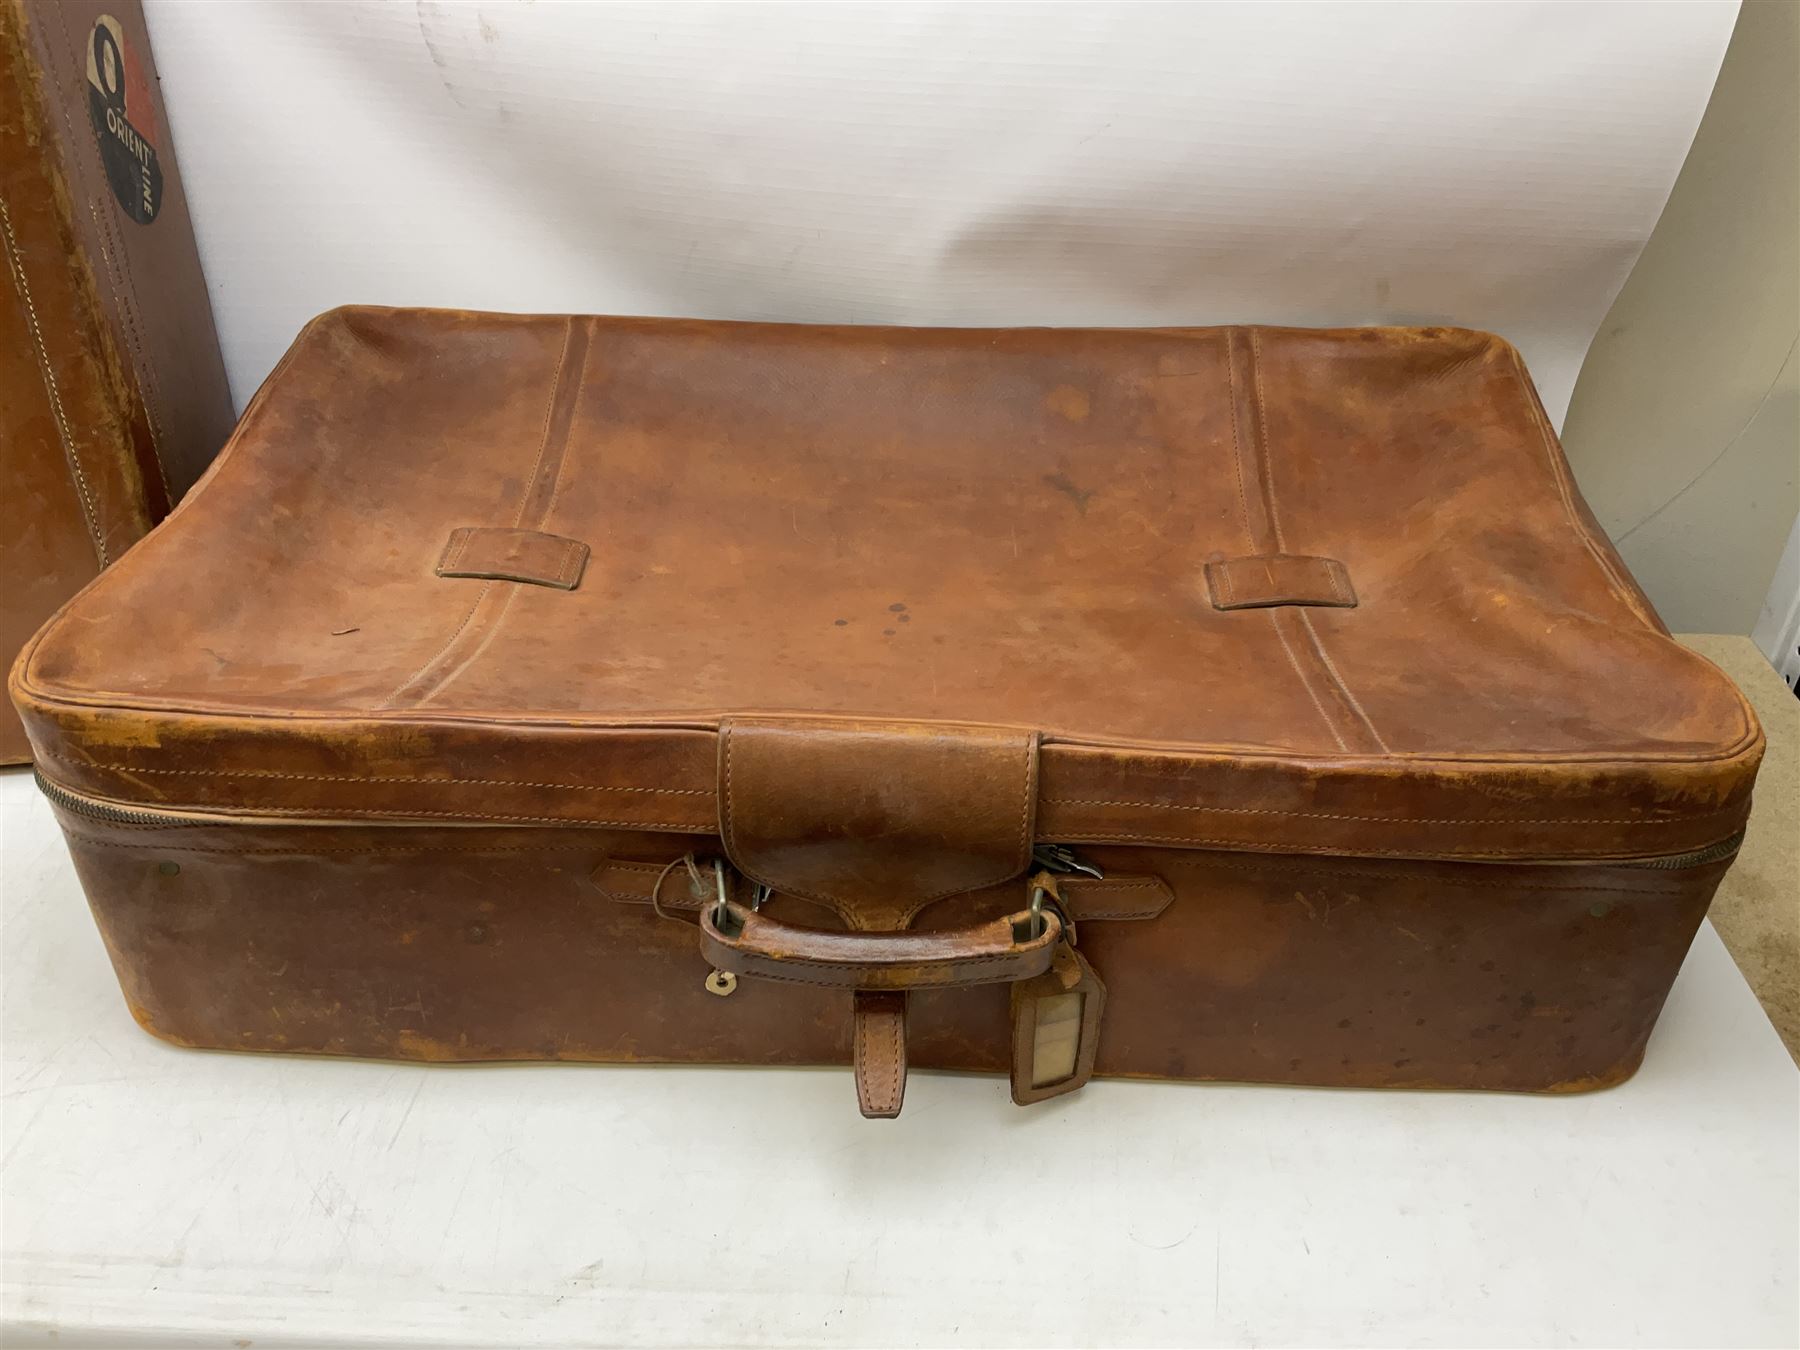 Two 20th century tan leather suitcases together with Lark violin and bow - Image 2 of 6